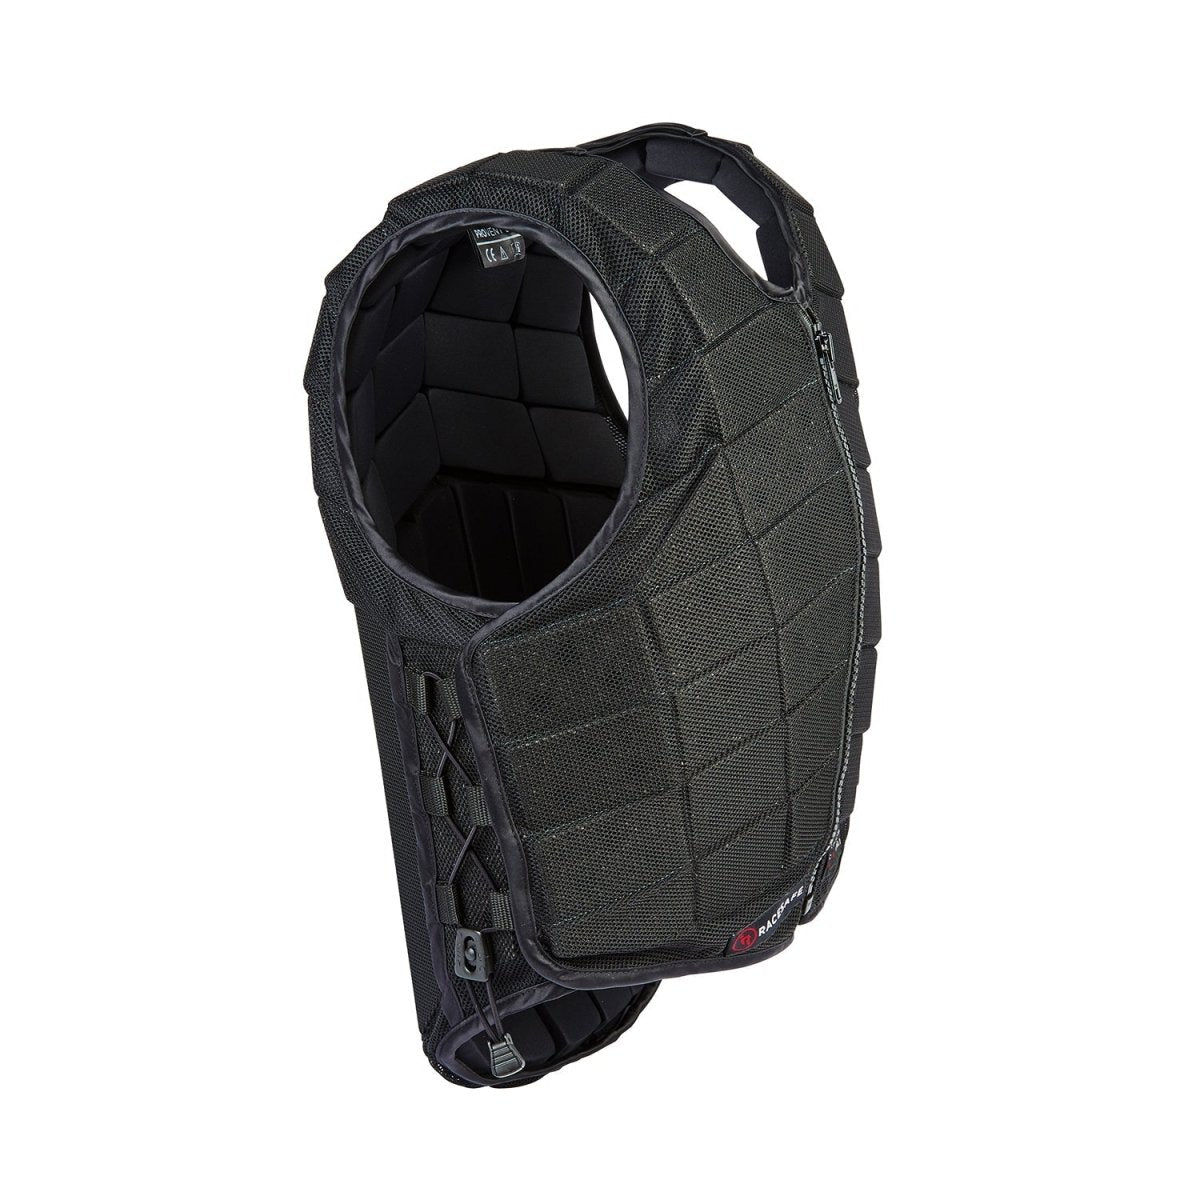 Racesafe Provent 3.0 Childs - Small - Short Back